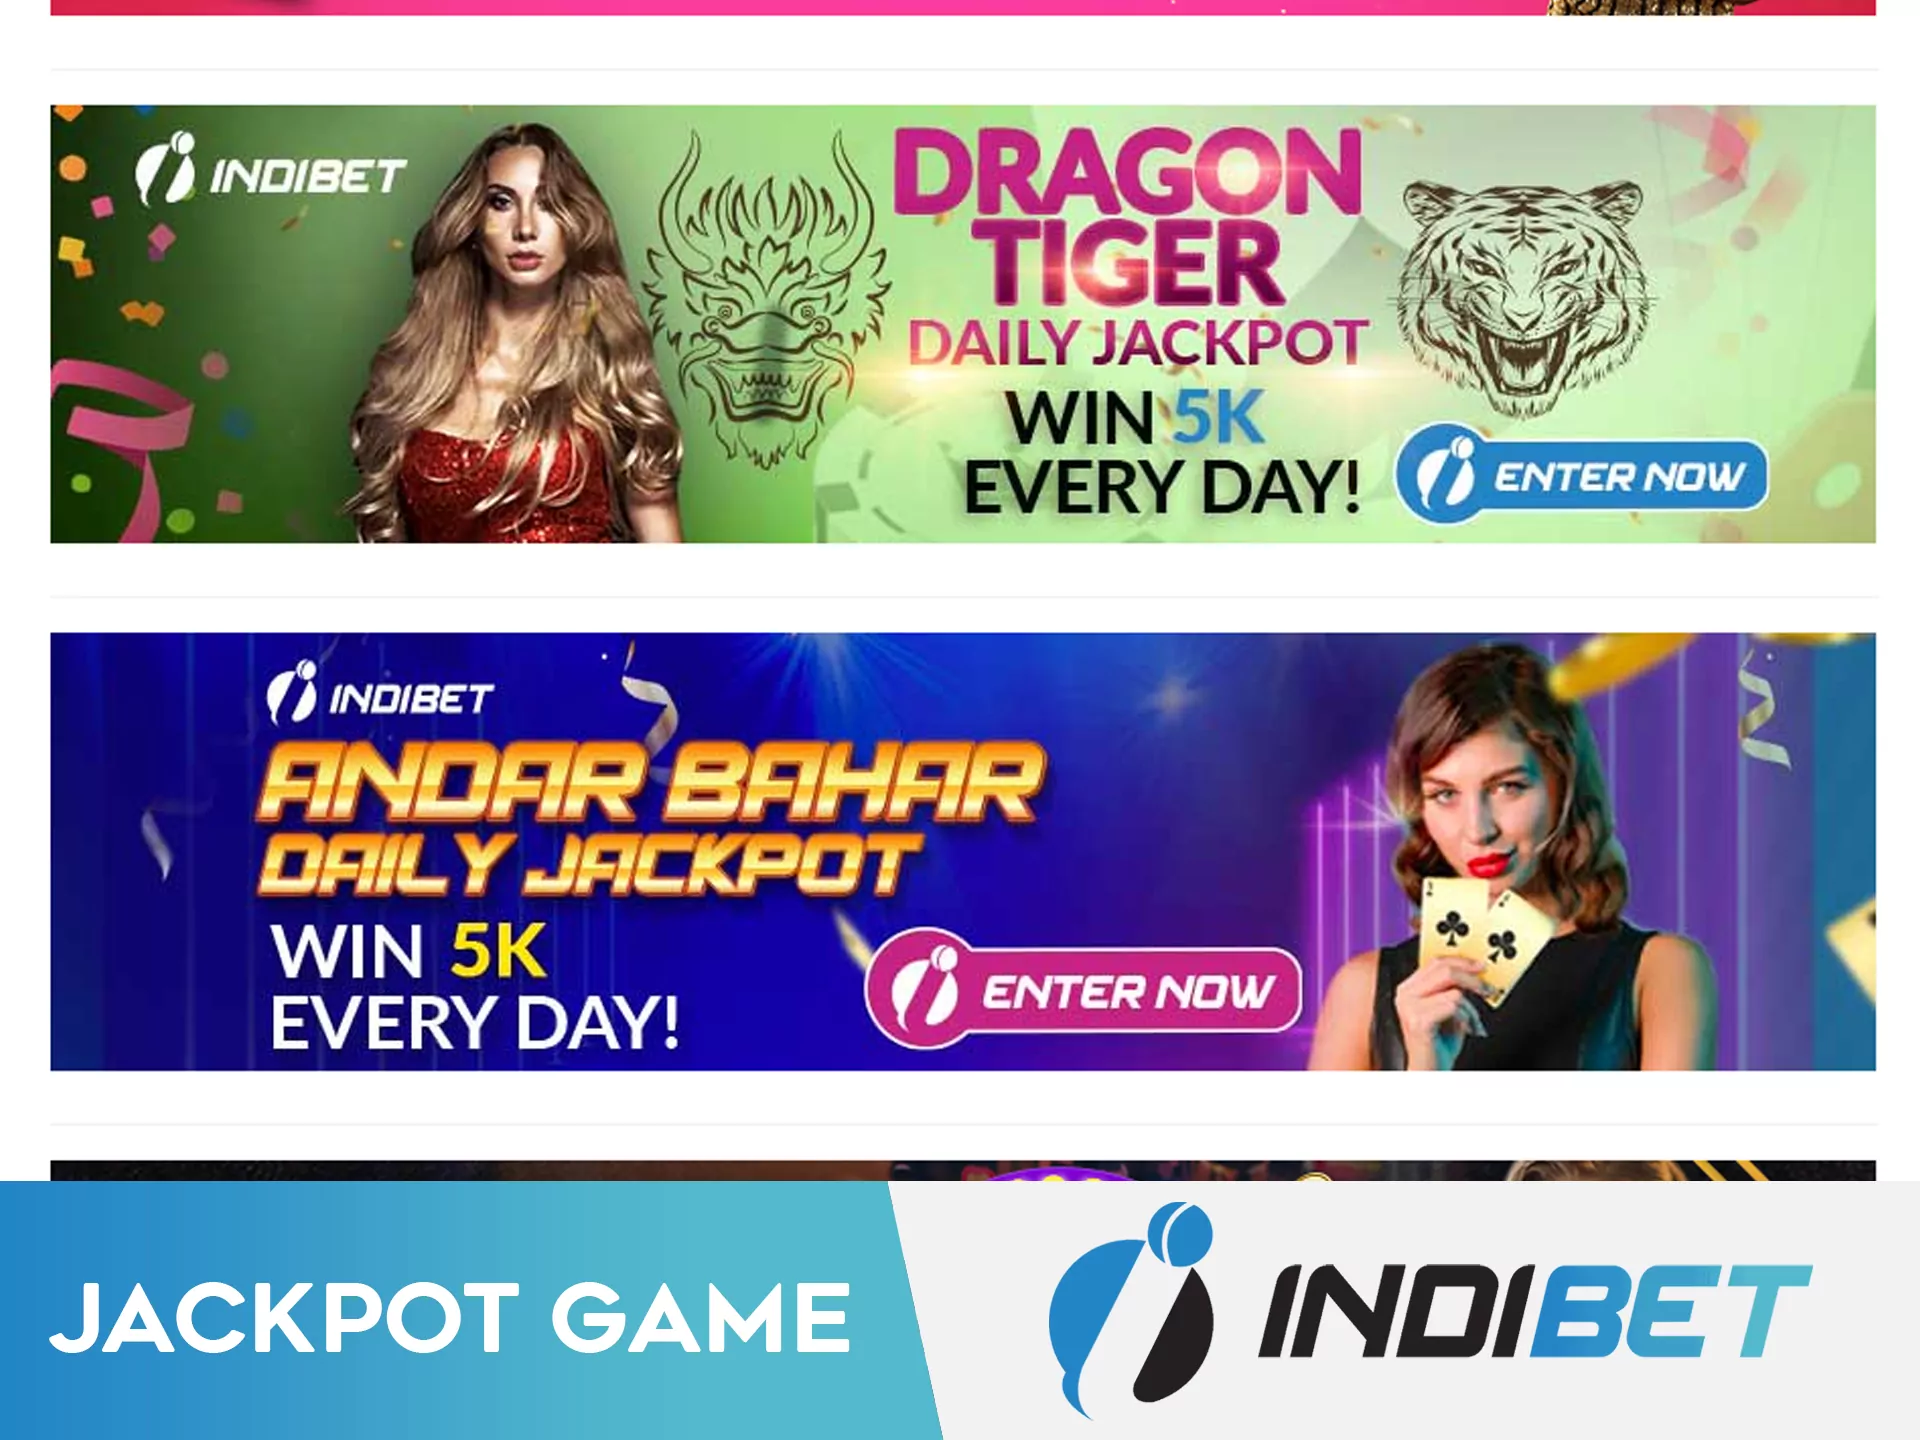 Try to win your part of the big Indibet jackpot.